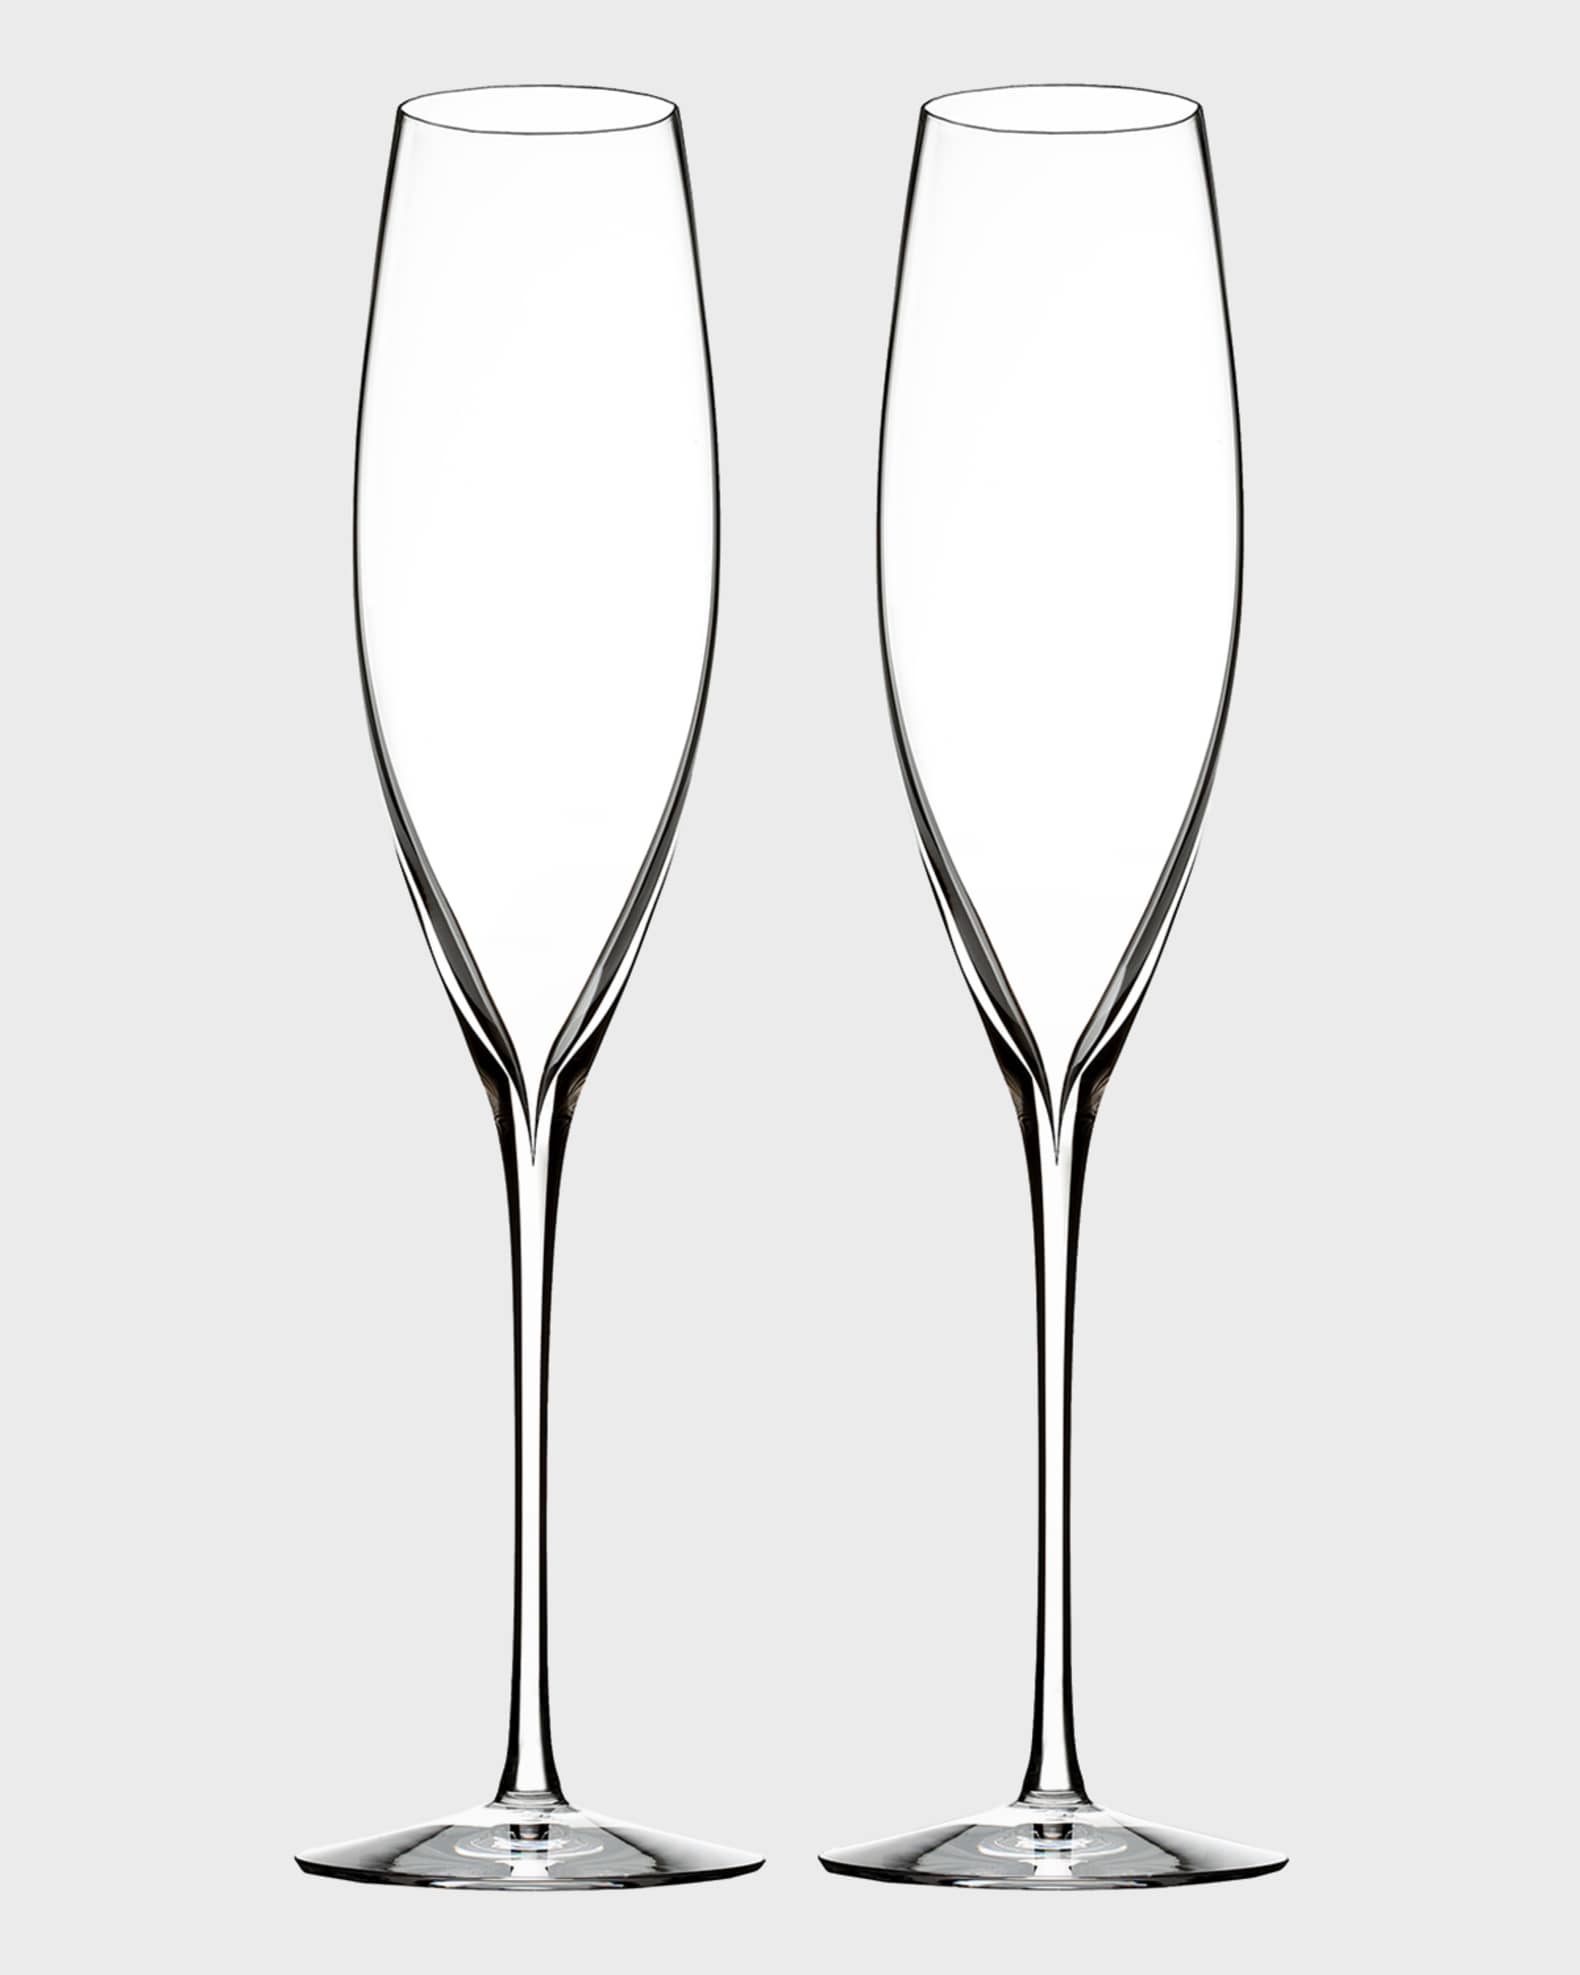 Waterford Lismore Wedding Champagne Flutes - Set of 2